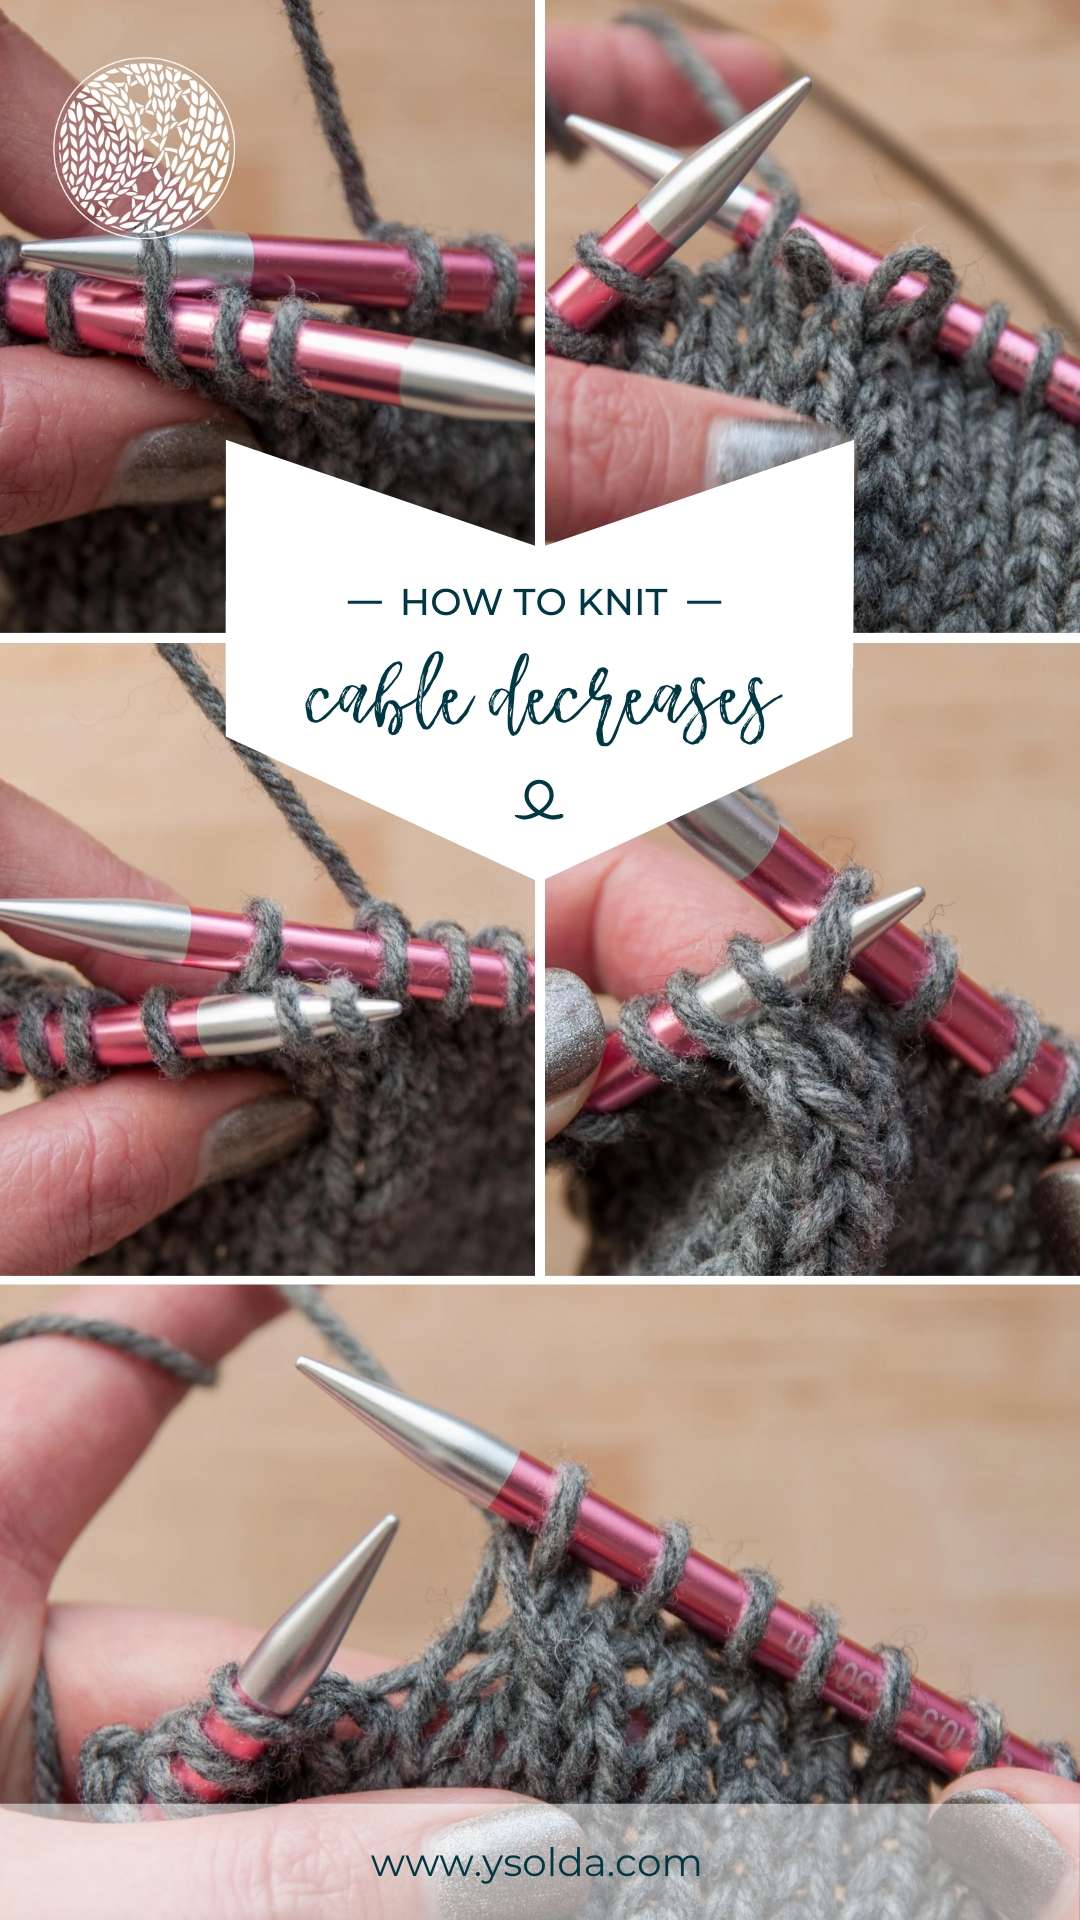 graphic with 5 thumbnail images of cable decreases being worked and the test "how to knit cable decreases"